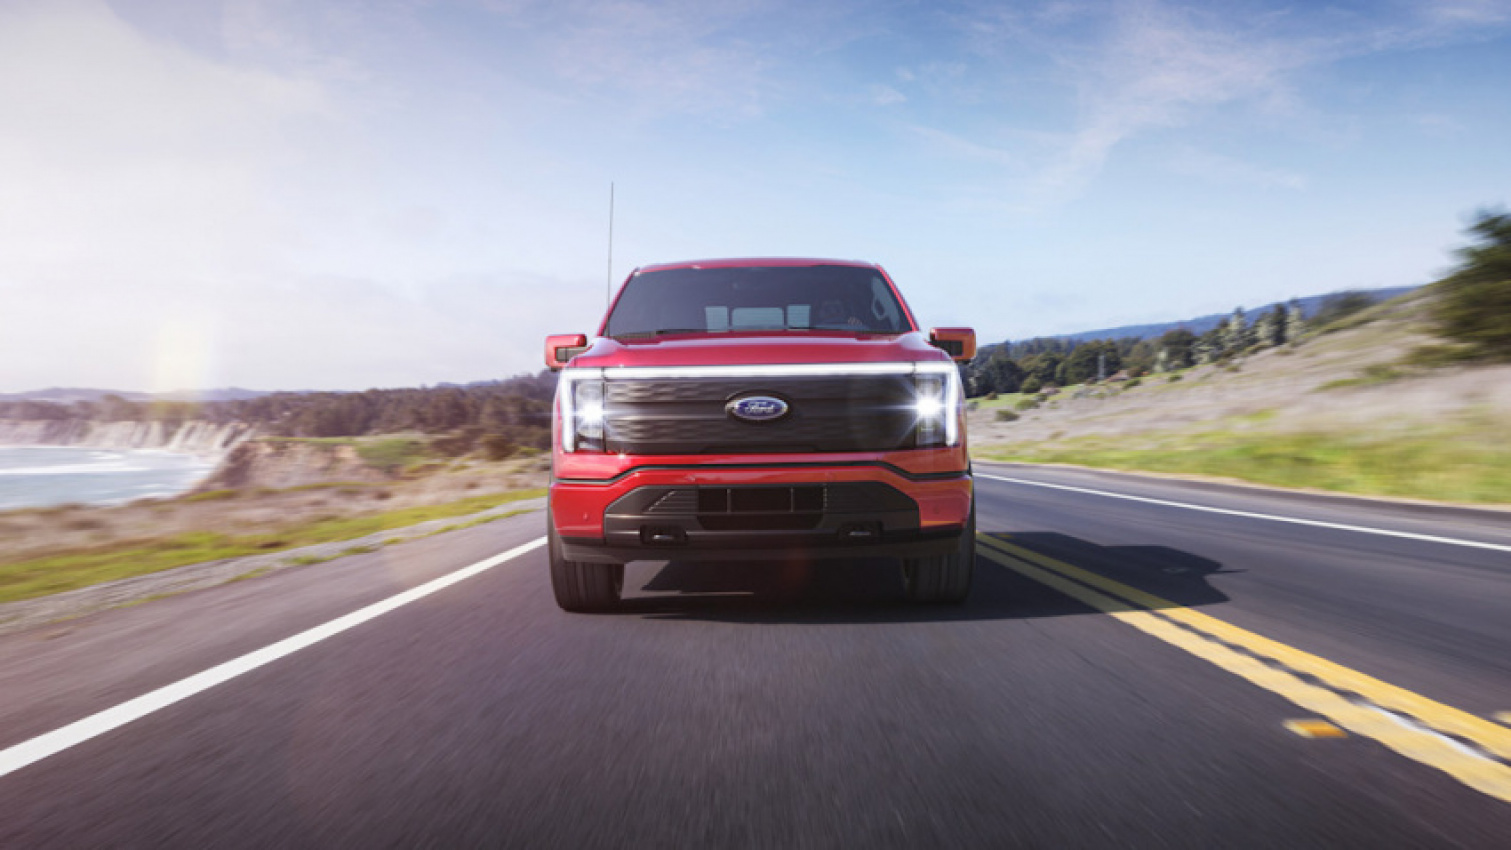 autos, cars, ford, electric, ford f-150, fuel efficiency, green, truck, 2022 ford f-150 lightning epa range figures leaked online